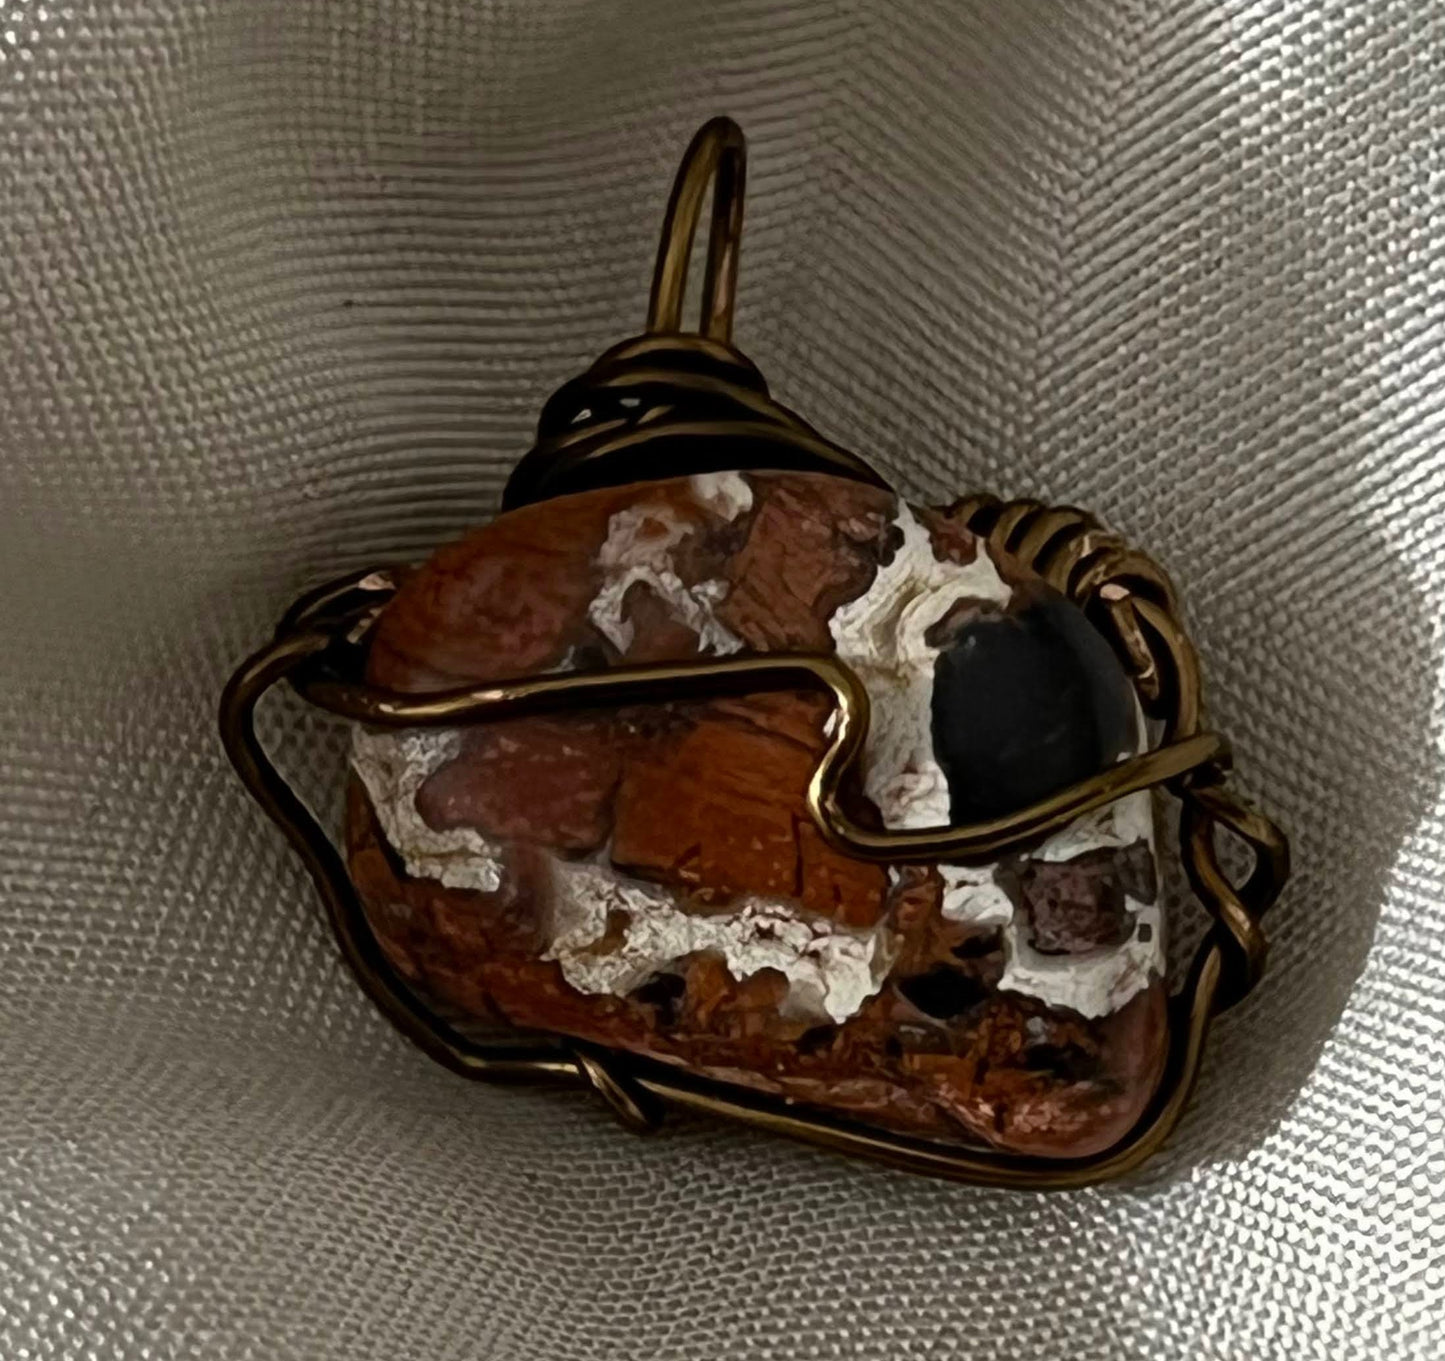 Brecciated Jasper (uplifting stone)-provide mental clarity and focus to its wearer.